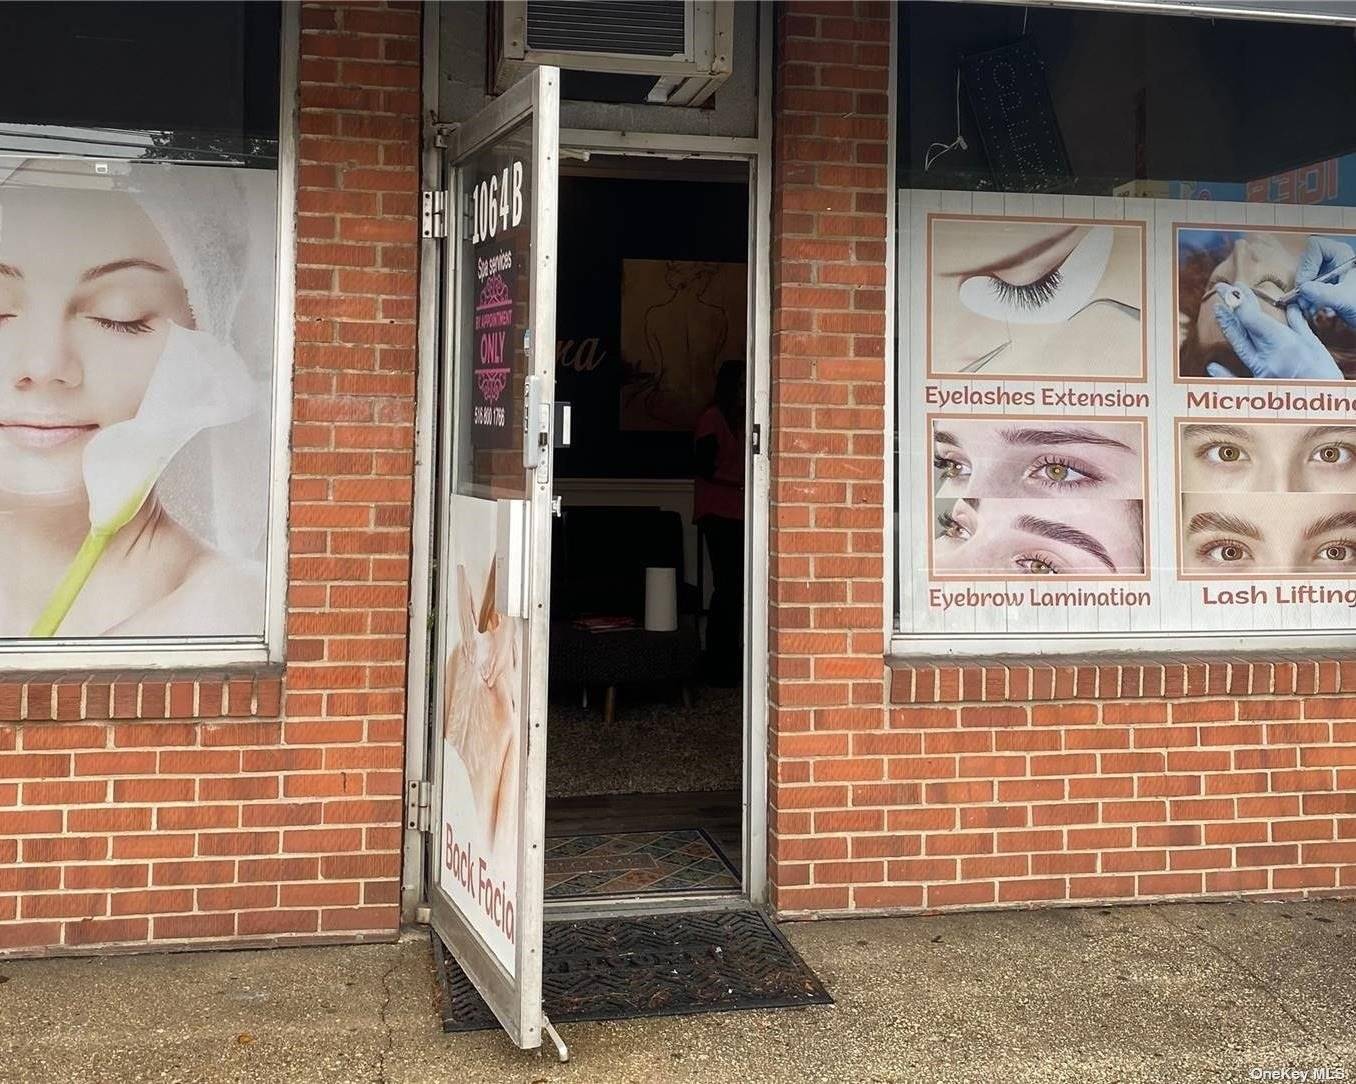 Spa Business Storefront for Sale in the Prime Location on Busy Street of Massapequa Strategically situated in a vibrant area with high foot traffic, the spa enjoys excellent visibility and ...